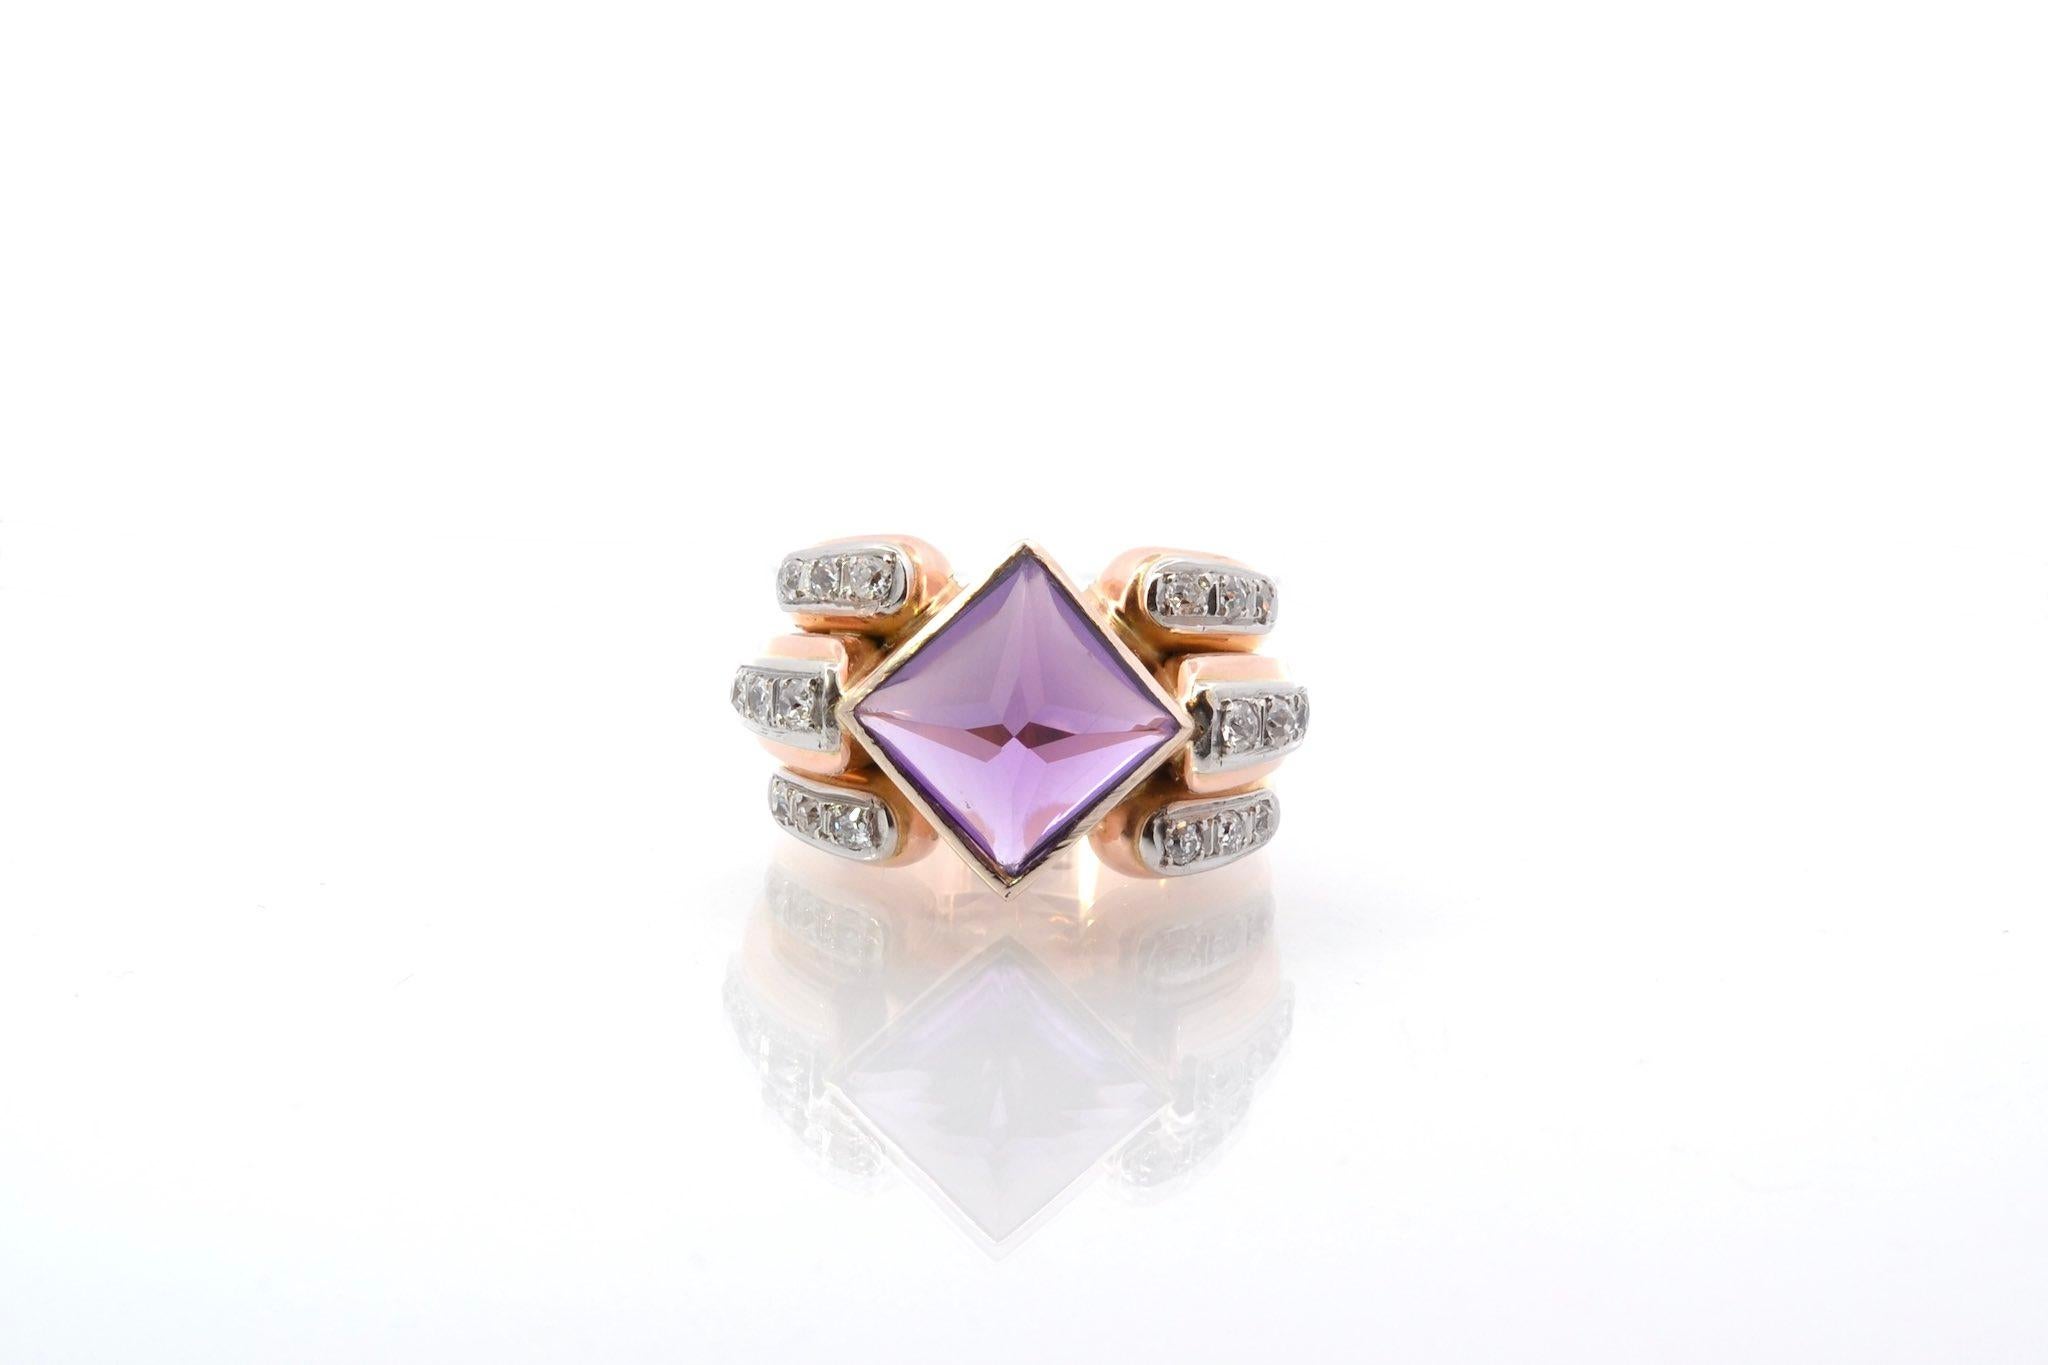 Stones: Amethyst of 7.8 cts and 18 old cut diamonds of 1.10 cts
Material: Platinum and 18k rose gold
Dimensions: 1.8cm
Weight: 21.8g
Period: 1950
Size: 55 (free sizing)
Certificate
Ref. : 24370